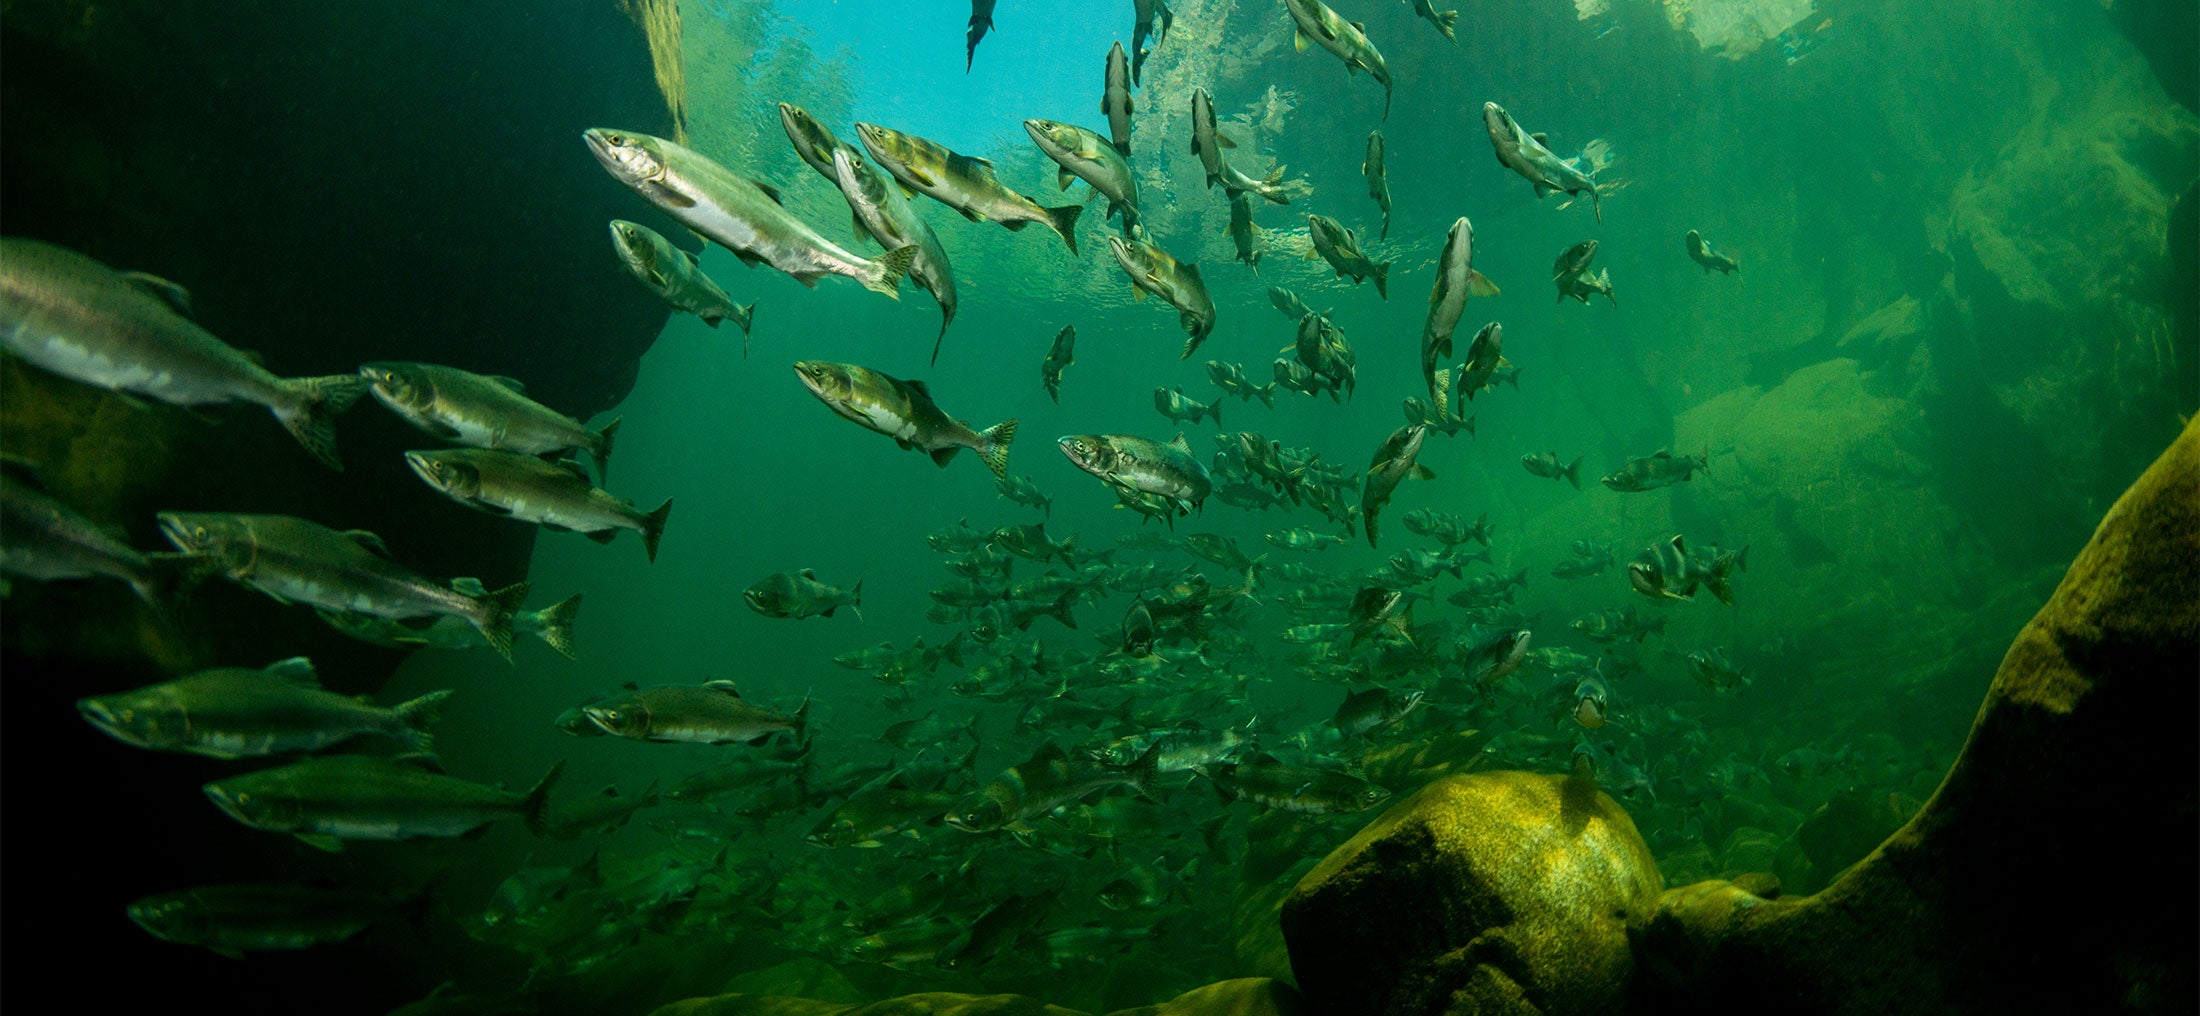 Underwater shot of a large school of wild pink salmon